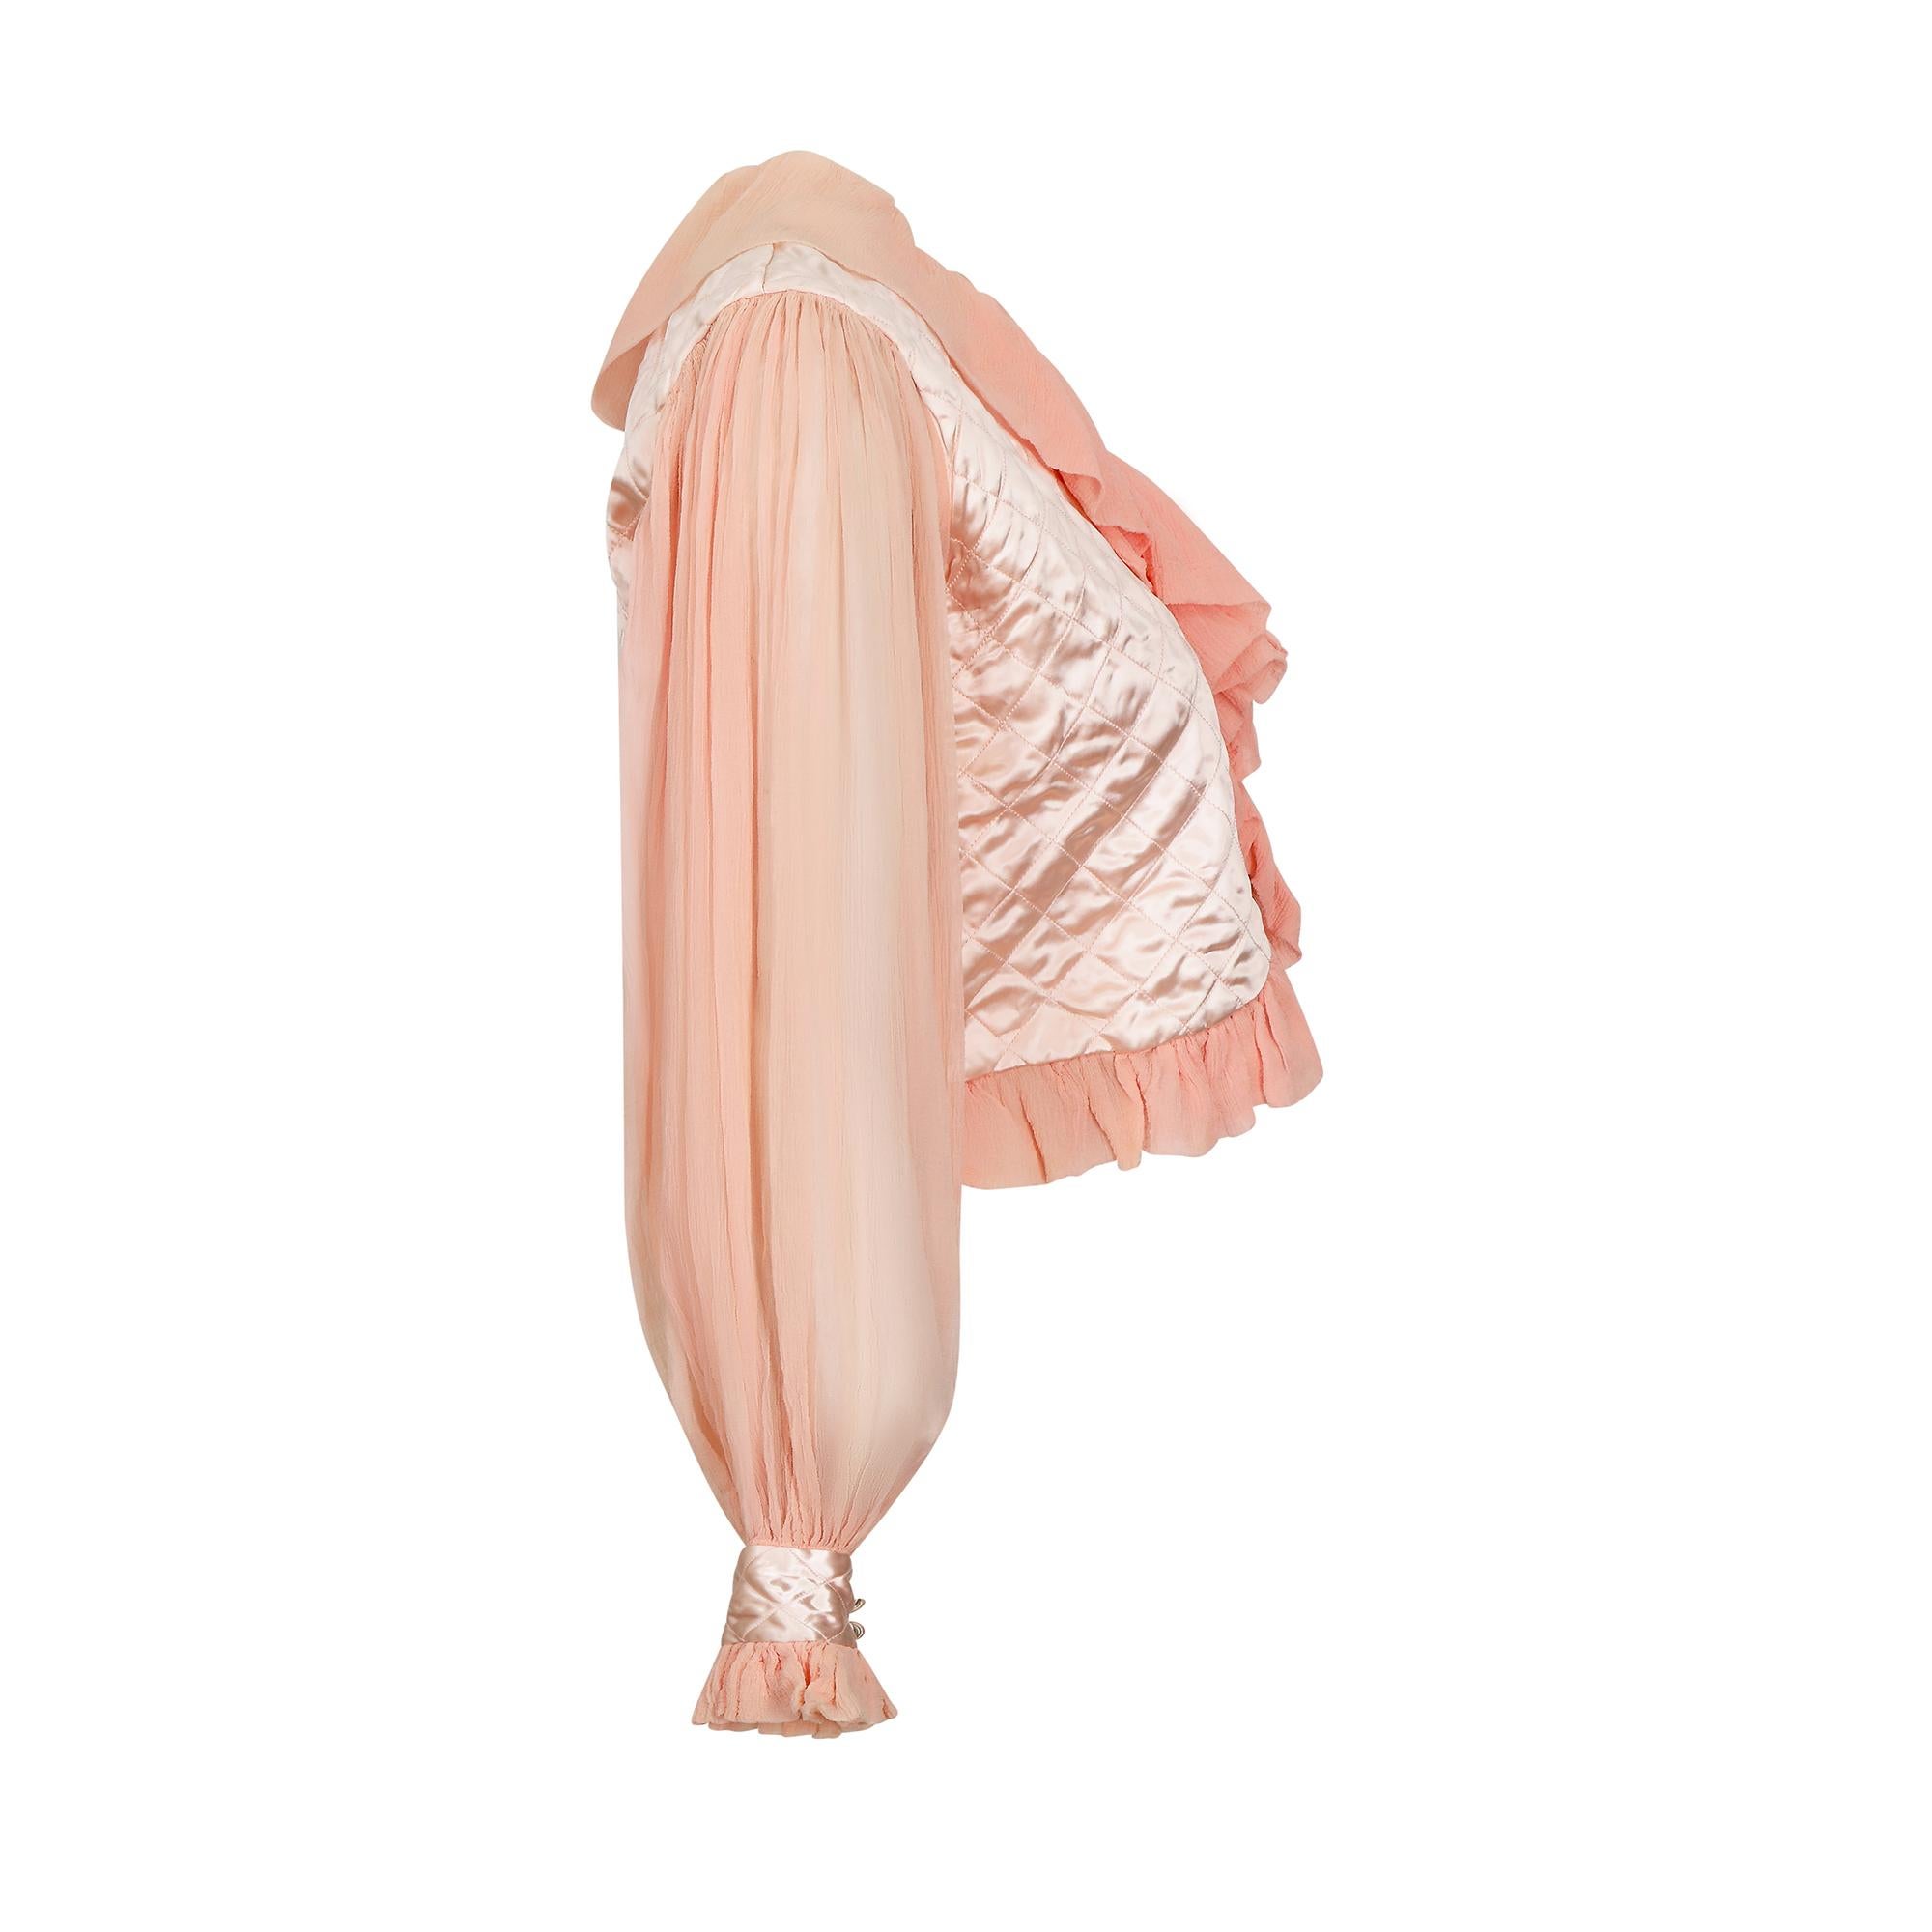 Sublime late 1930s or 1940s silk crepe and satin quilted bed jacket. The original version of loungewear but this is far too pretty to wear in bed! The jacket is a lovely peachy pink with very full voluminous long chiffon sleeves. The cuffs are satin